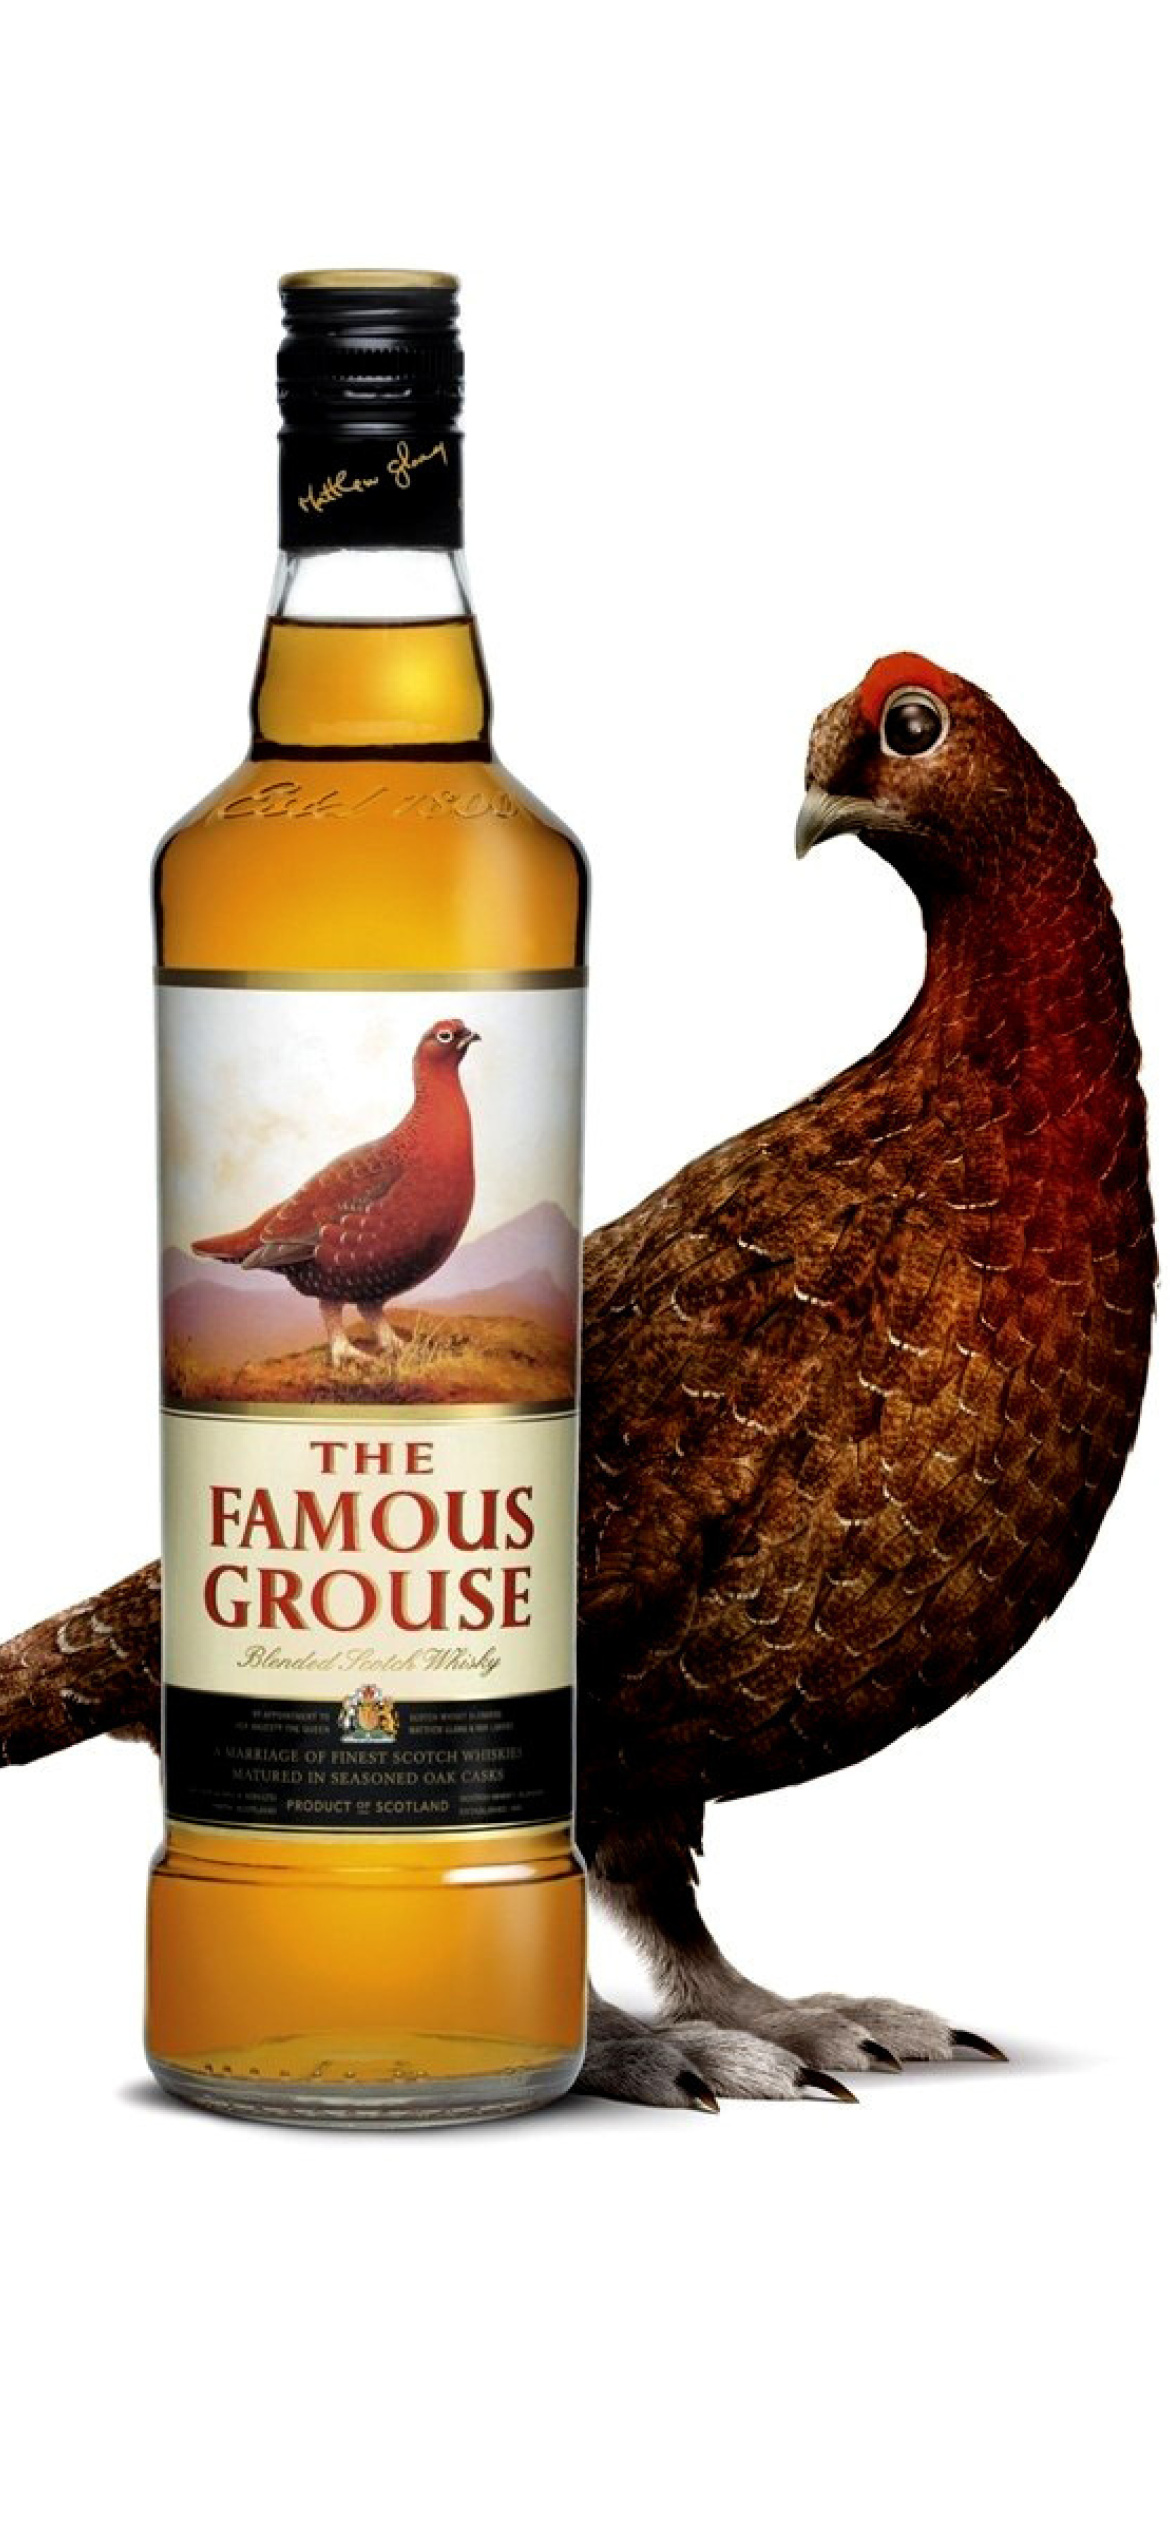 The Famous Grouse Scotch Whisky wallpaper 1170x2532